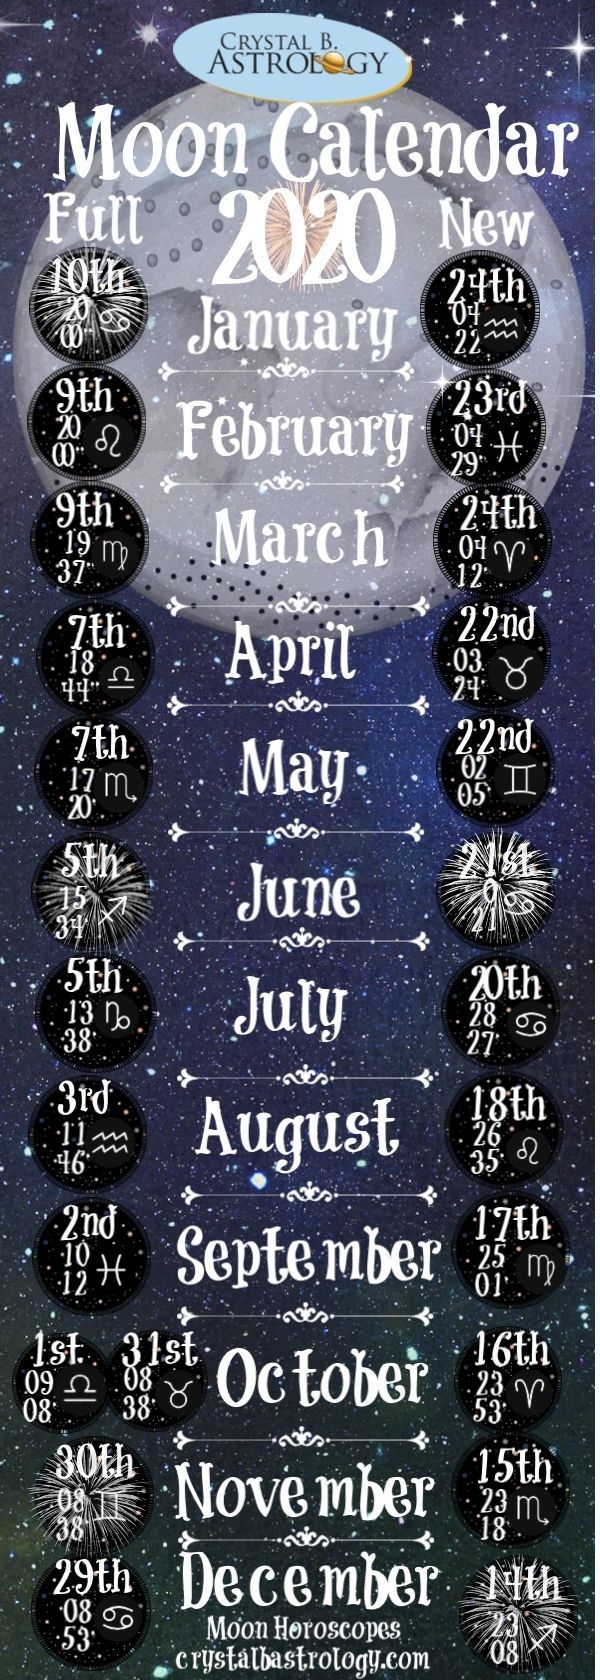 astrological signs and moon phases